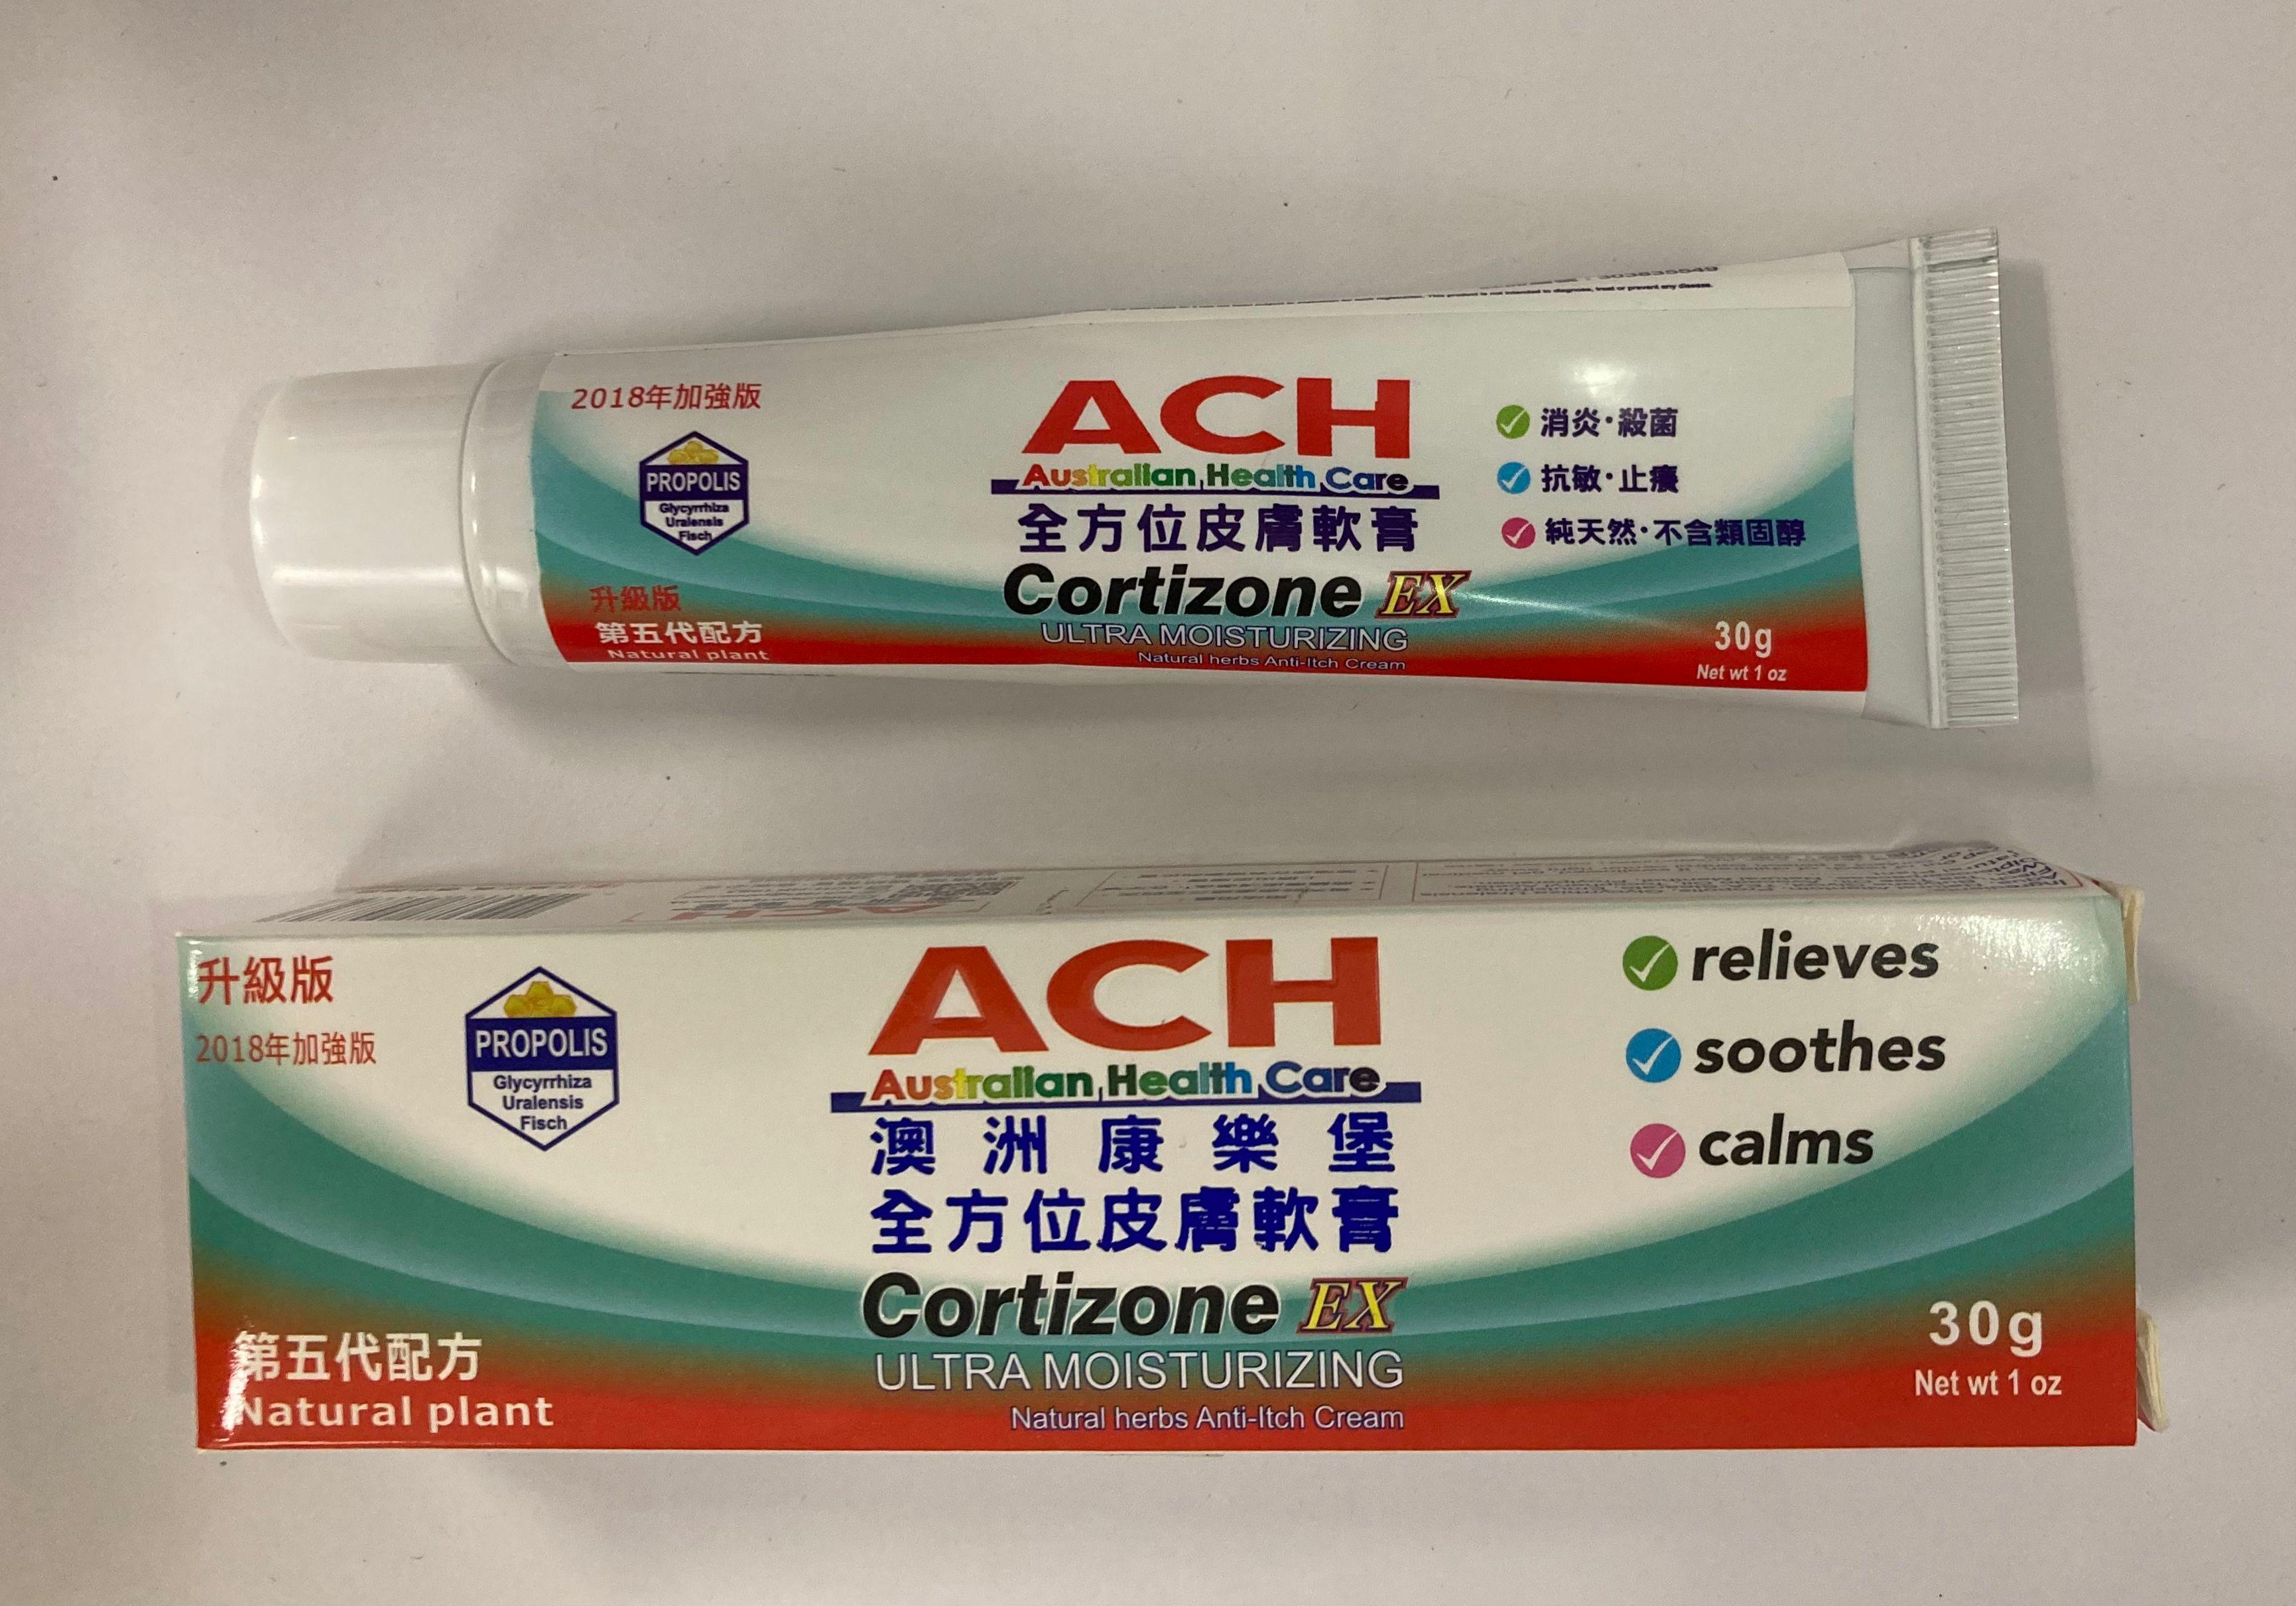 The Department of Health today (August 23) appealed to the public not to buy or use two topical products, ACH Cortizone EX Ultra Moisturizing Natural Herbs Anti-Itch Cream and ACH Cortizone EX Ultra Moisturizing Natural Herbs Anti-Itch Cream Natural plant, as they were found to contain an undeclared controlled drug ingredient.